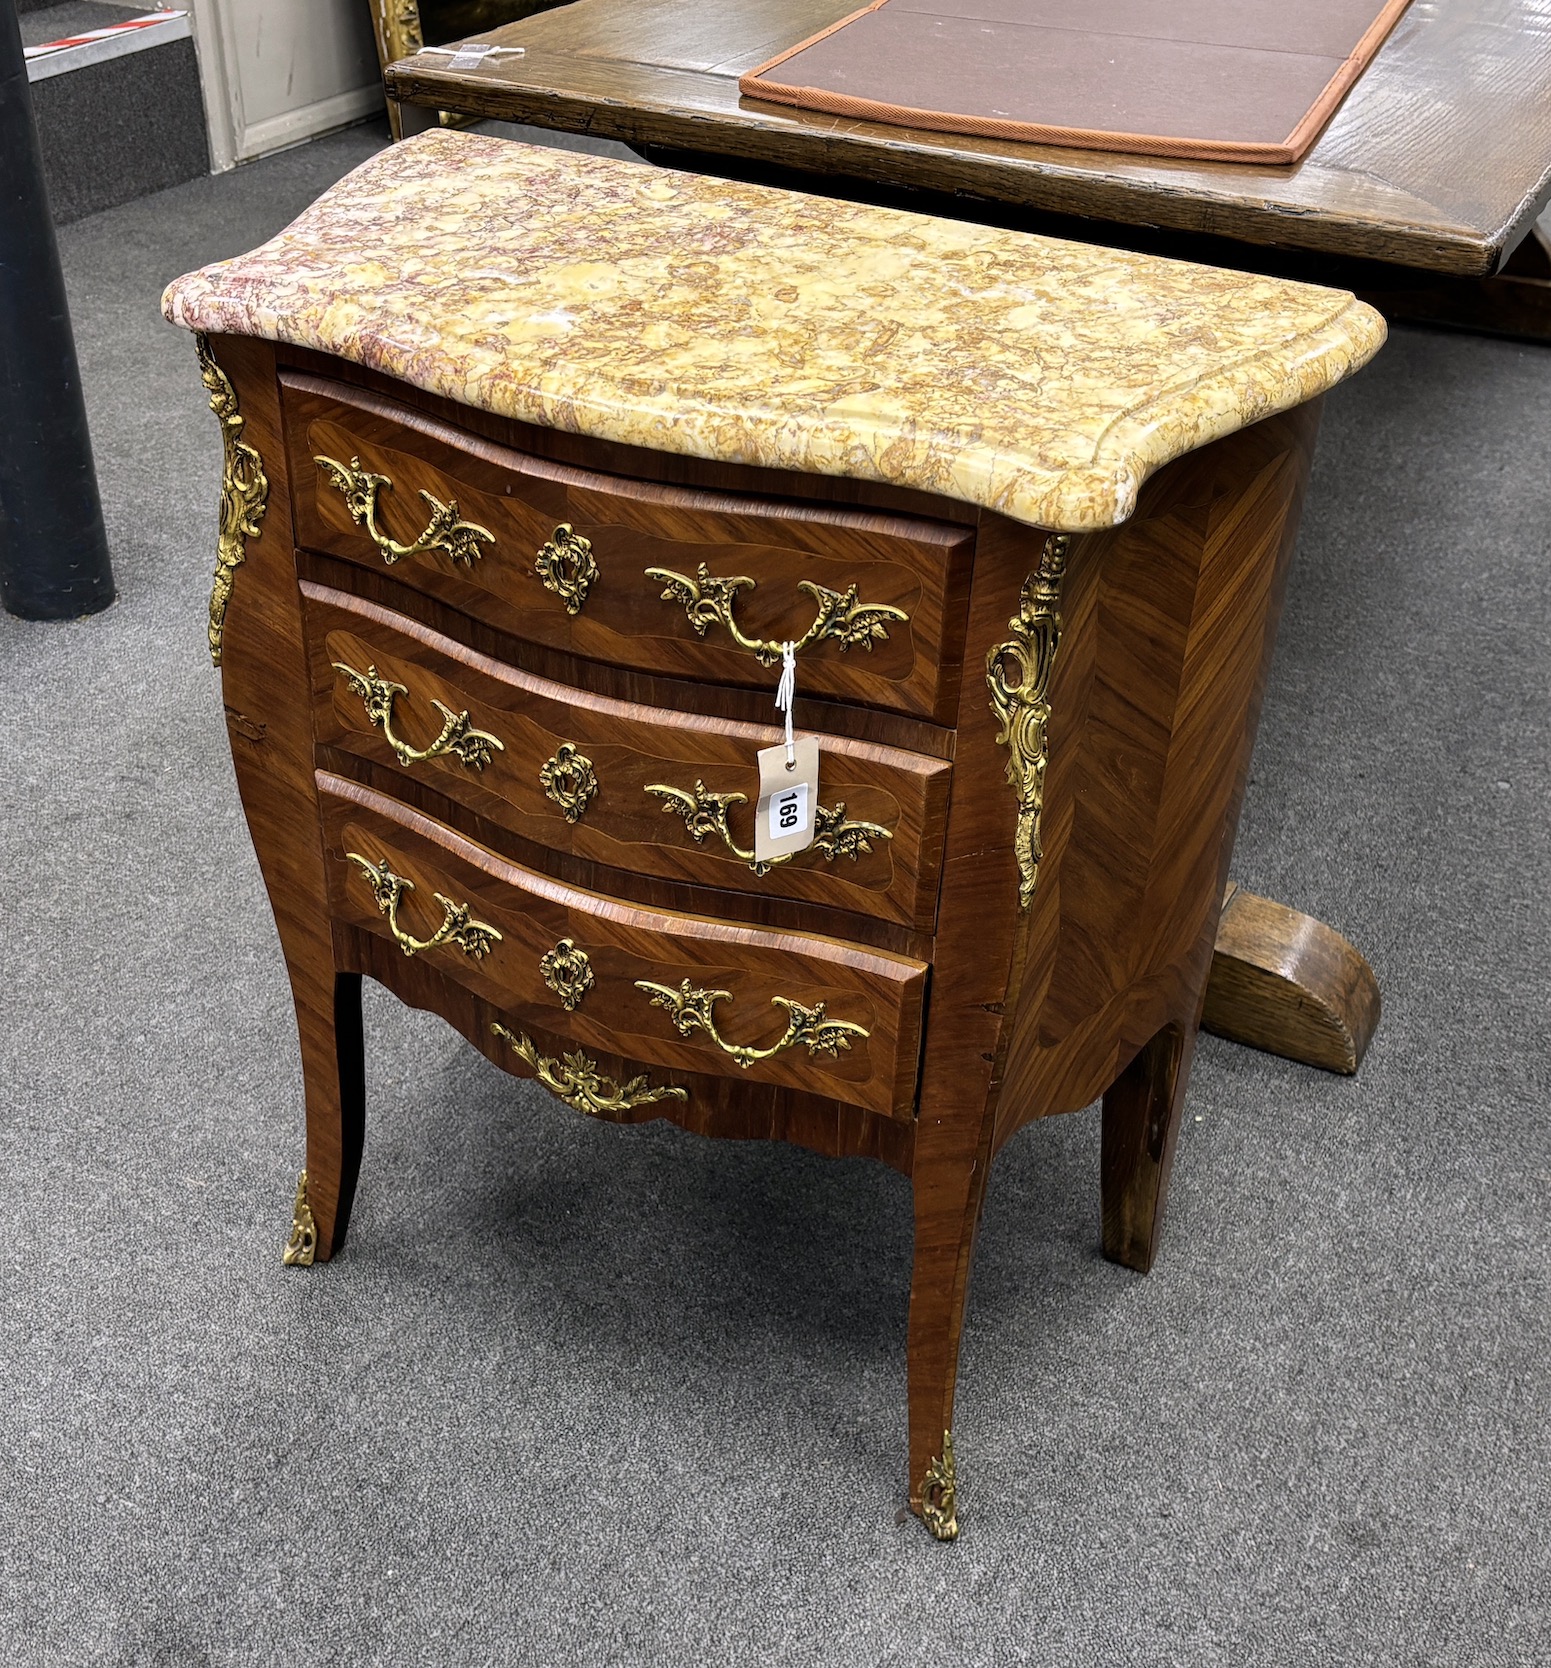 A Louis XV style gilt metal mounted marble topped serpentine petite commode, width 65cm, depth 34cm, height 74cm